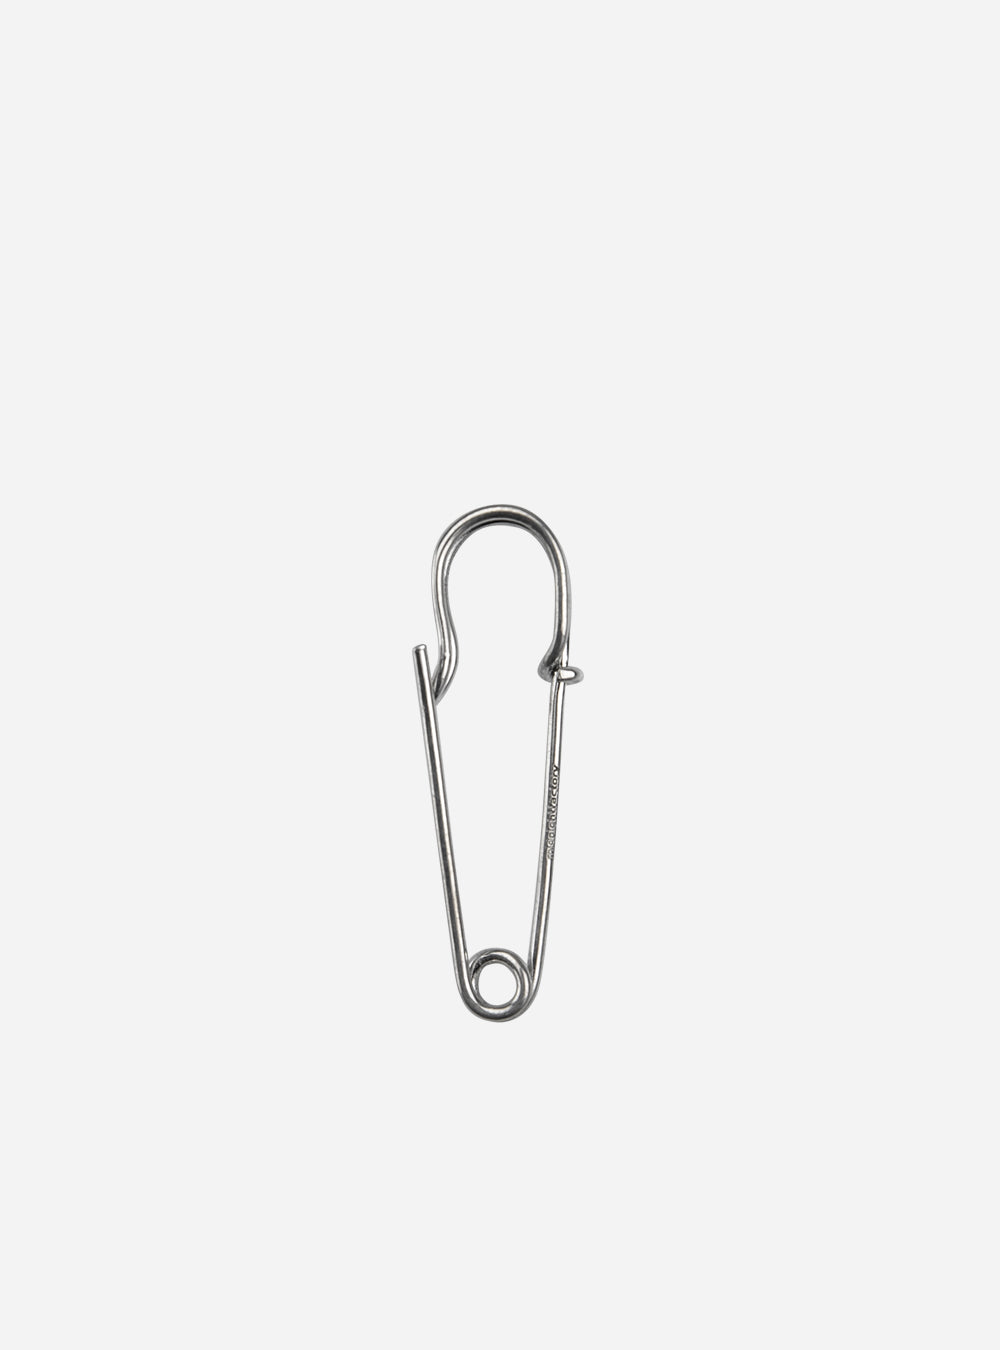 a MIDNIGHTFACTORY safety-pin earring on a white background.